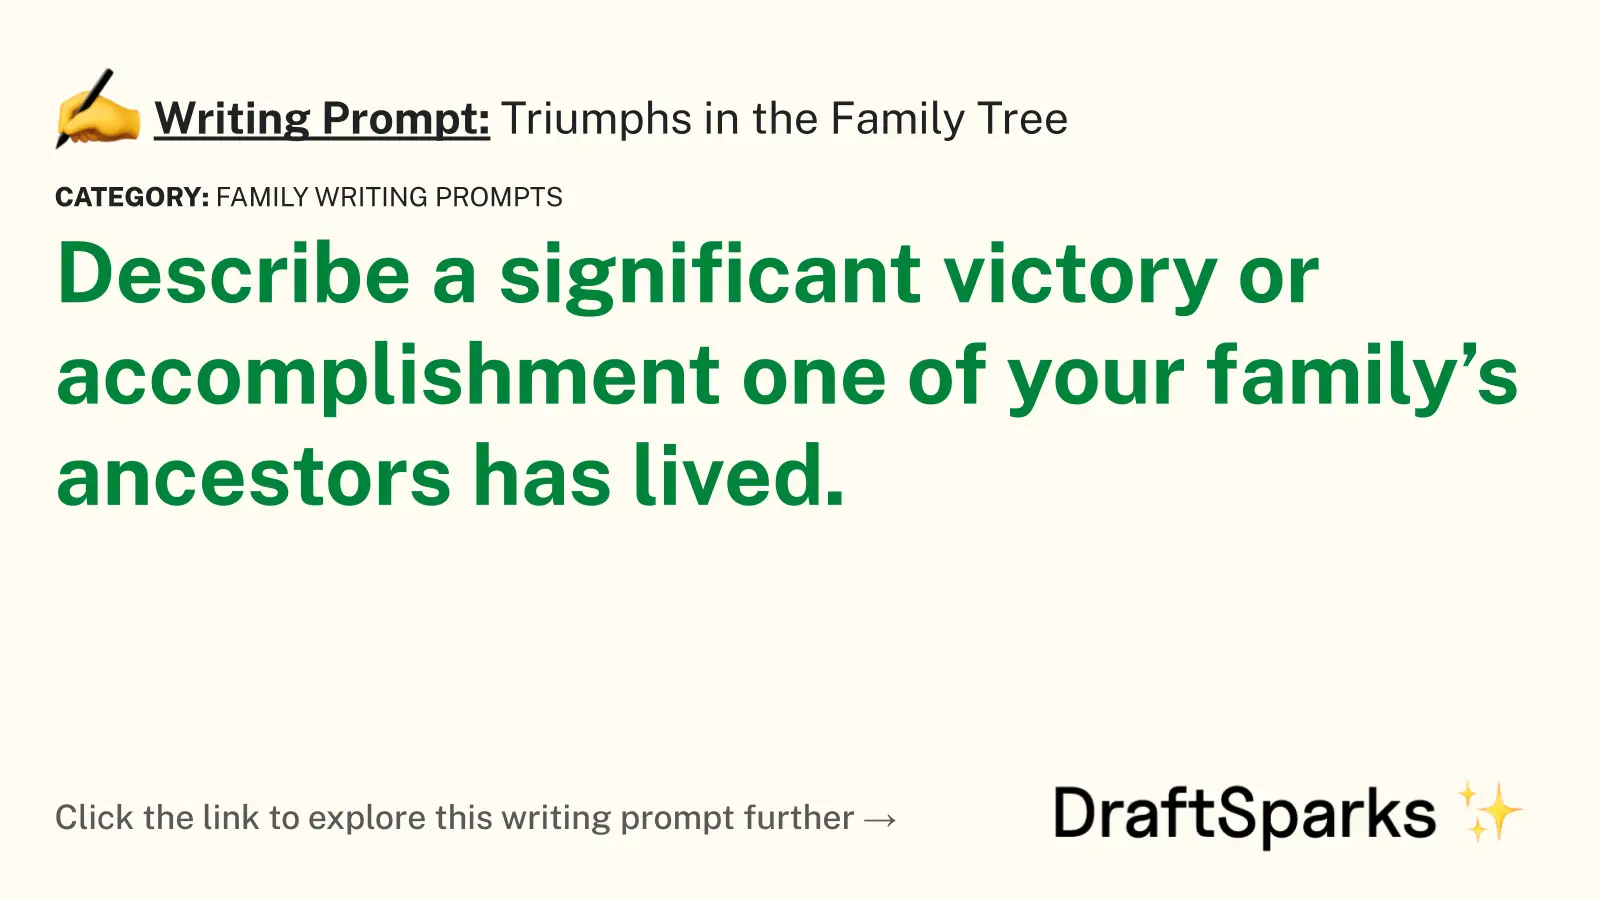 Triumphs in the Family Tree